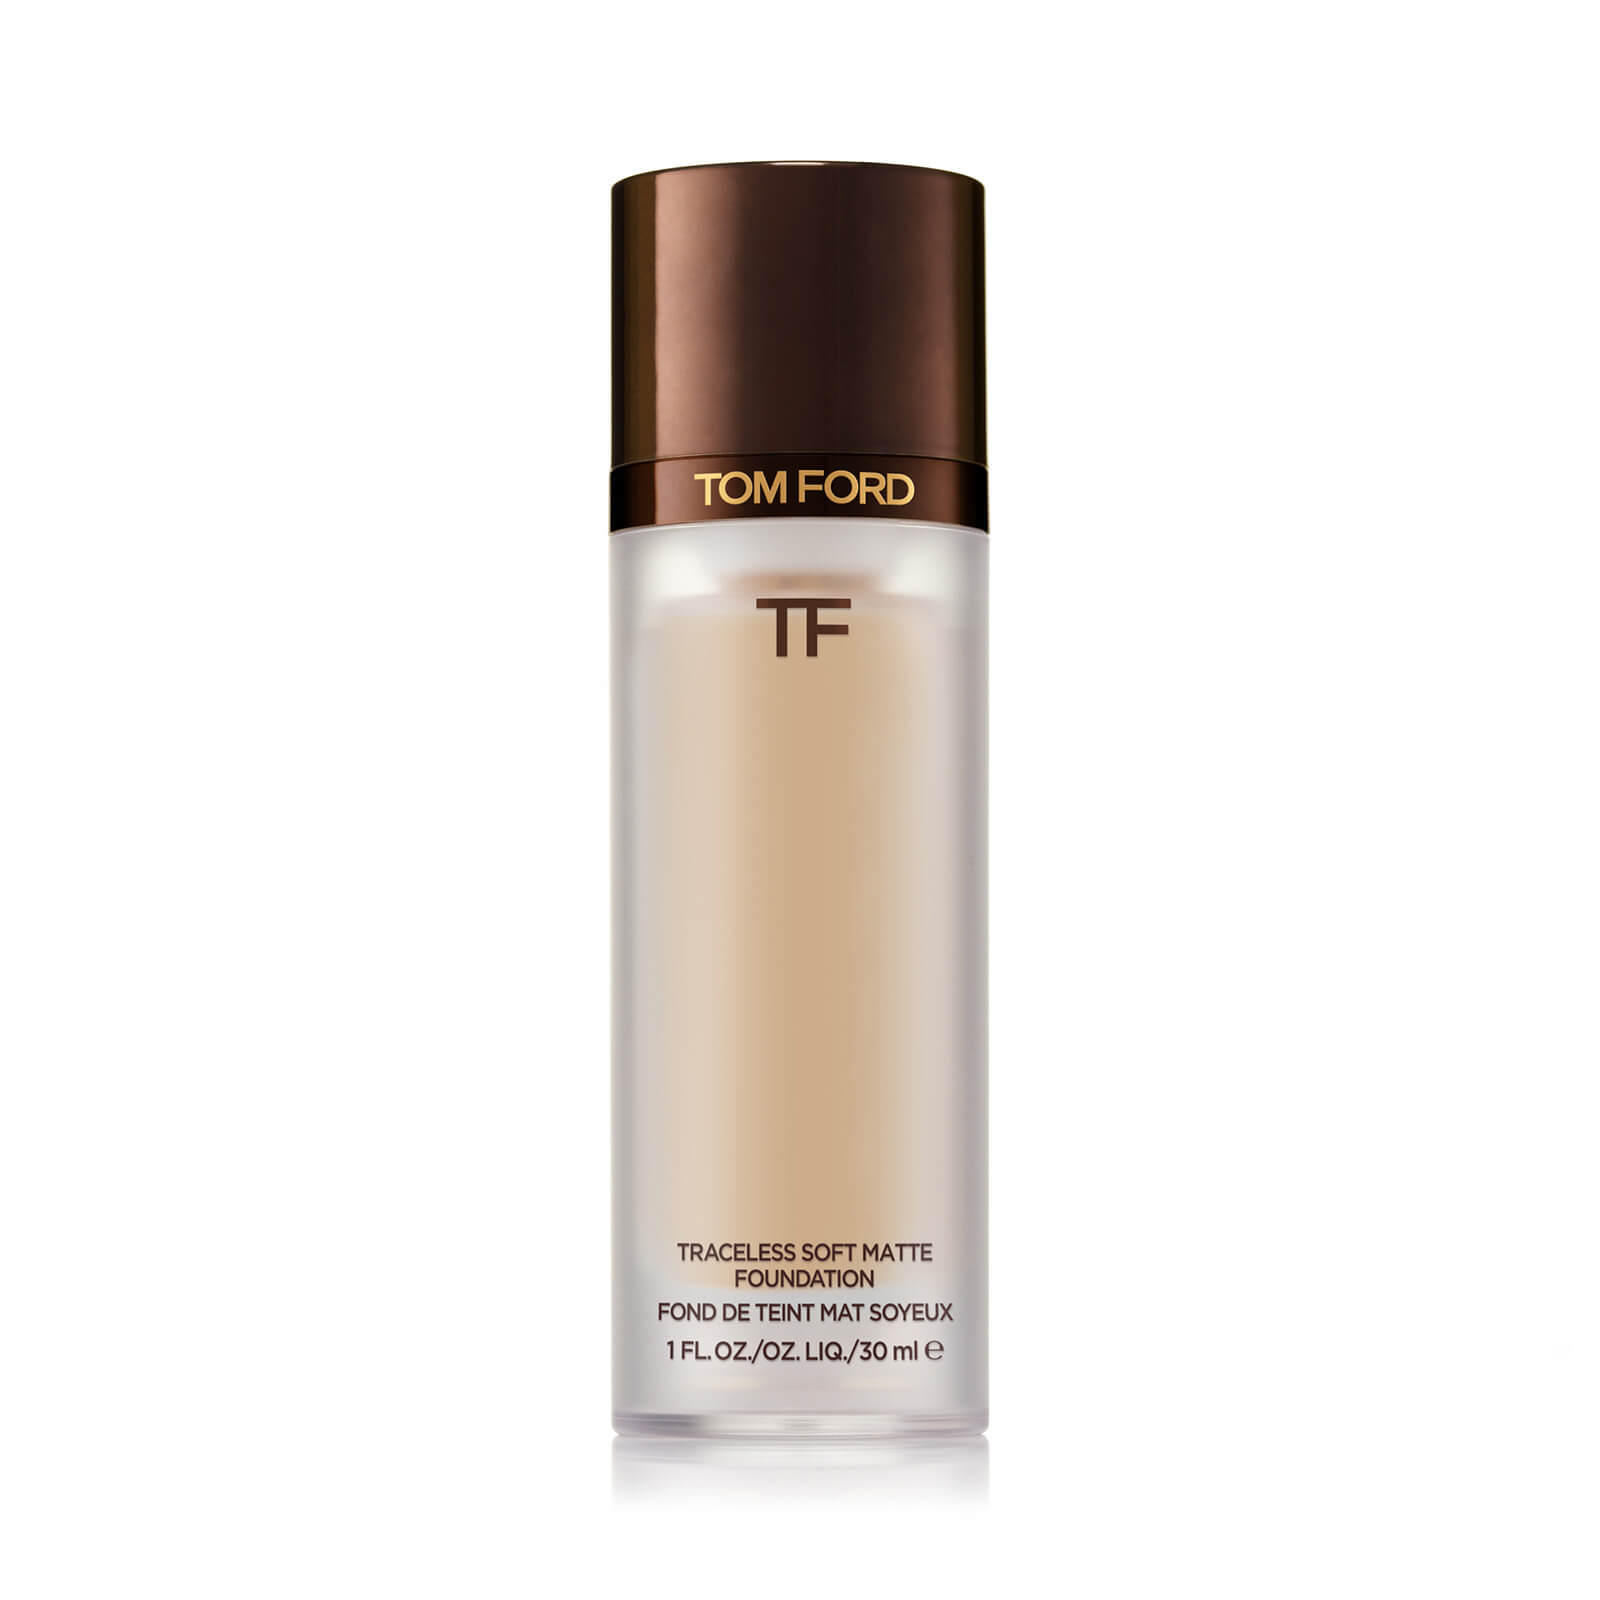 tom ford traceless soft matte foundation 30ml (various shades) - bisque